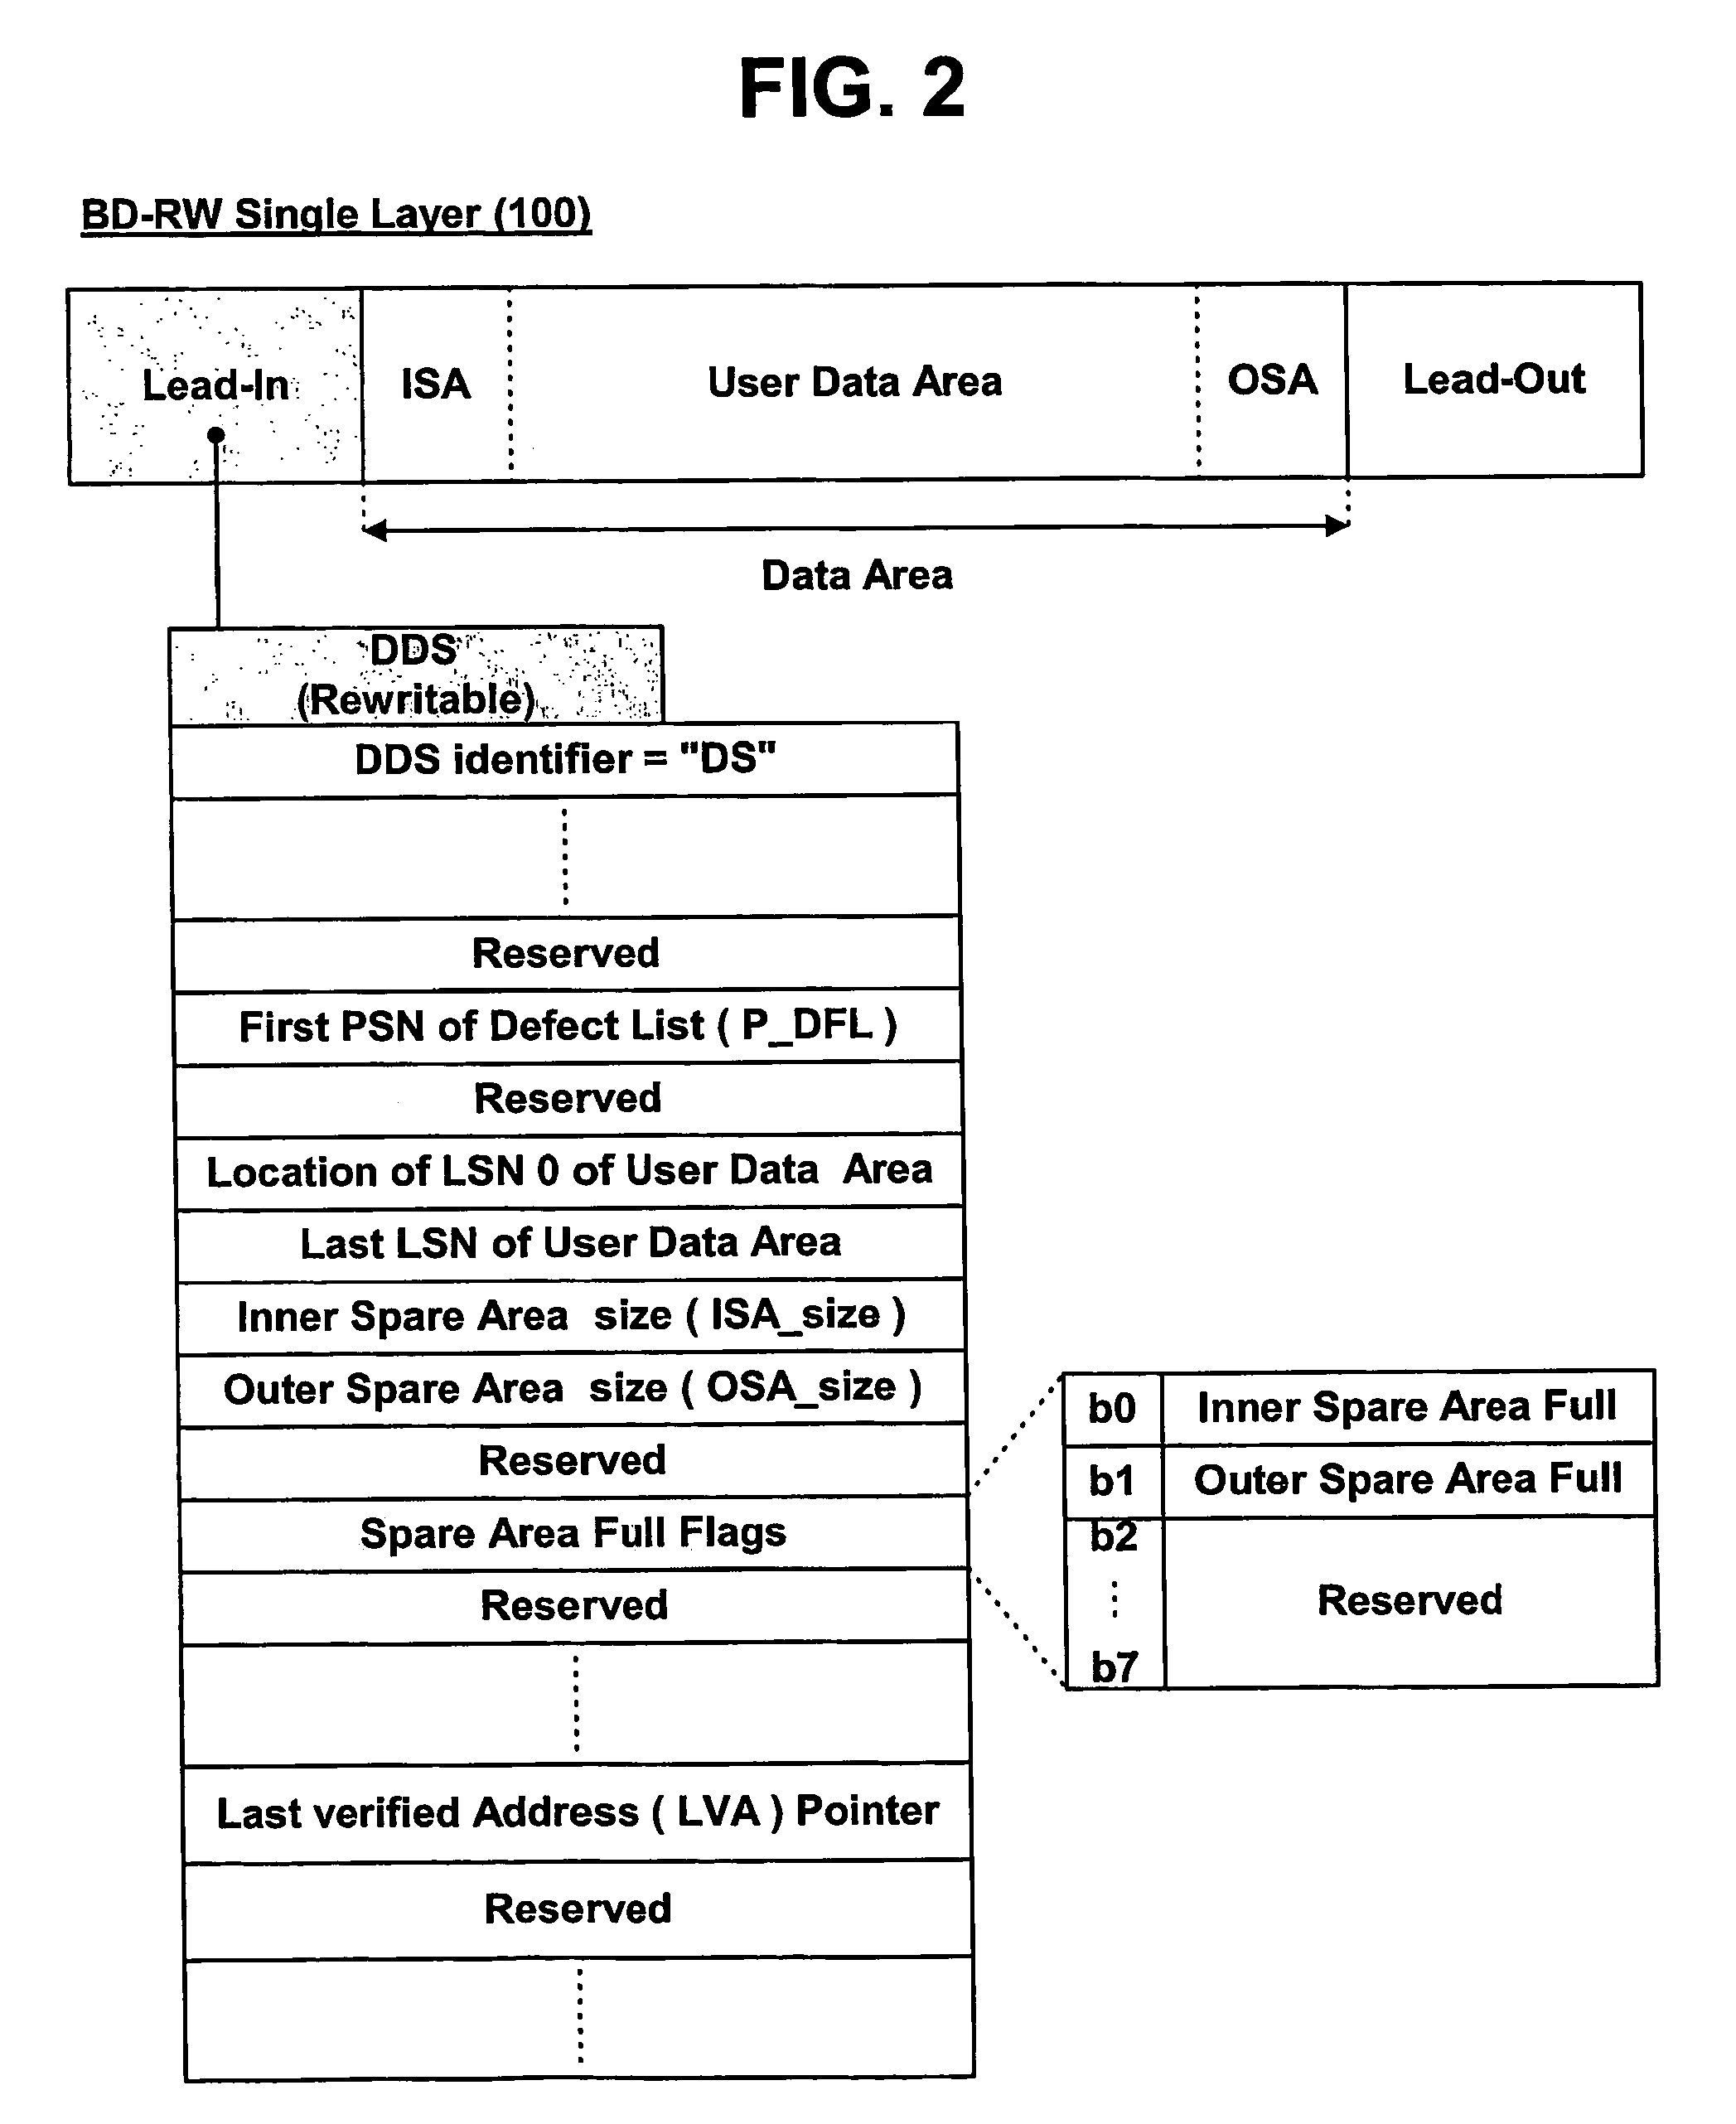 High-density multi-layer optical disc, method for recording data thereon on layer-by-layer basis, and method for managing spare areas thereof